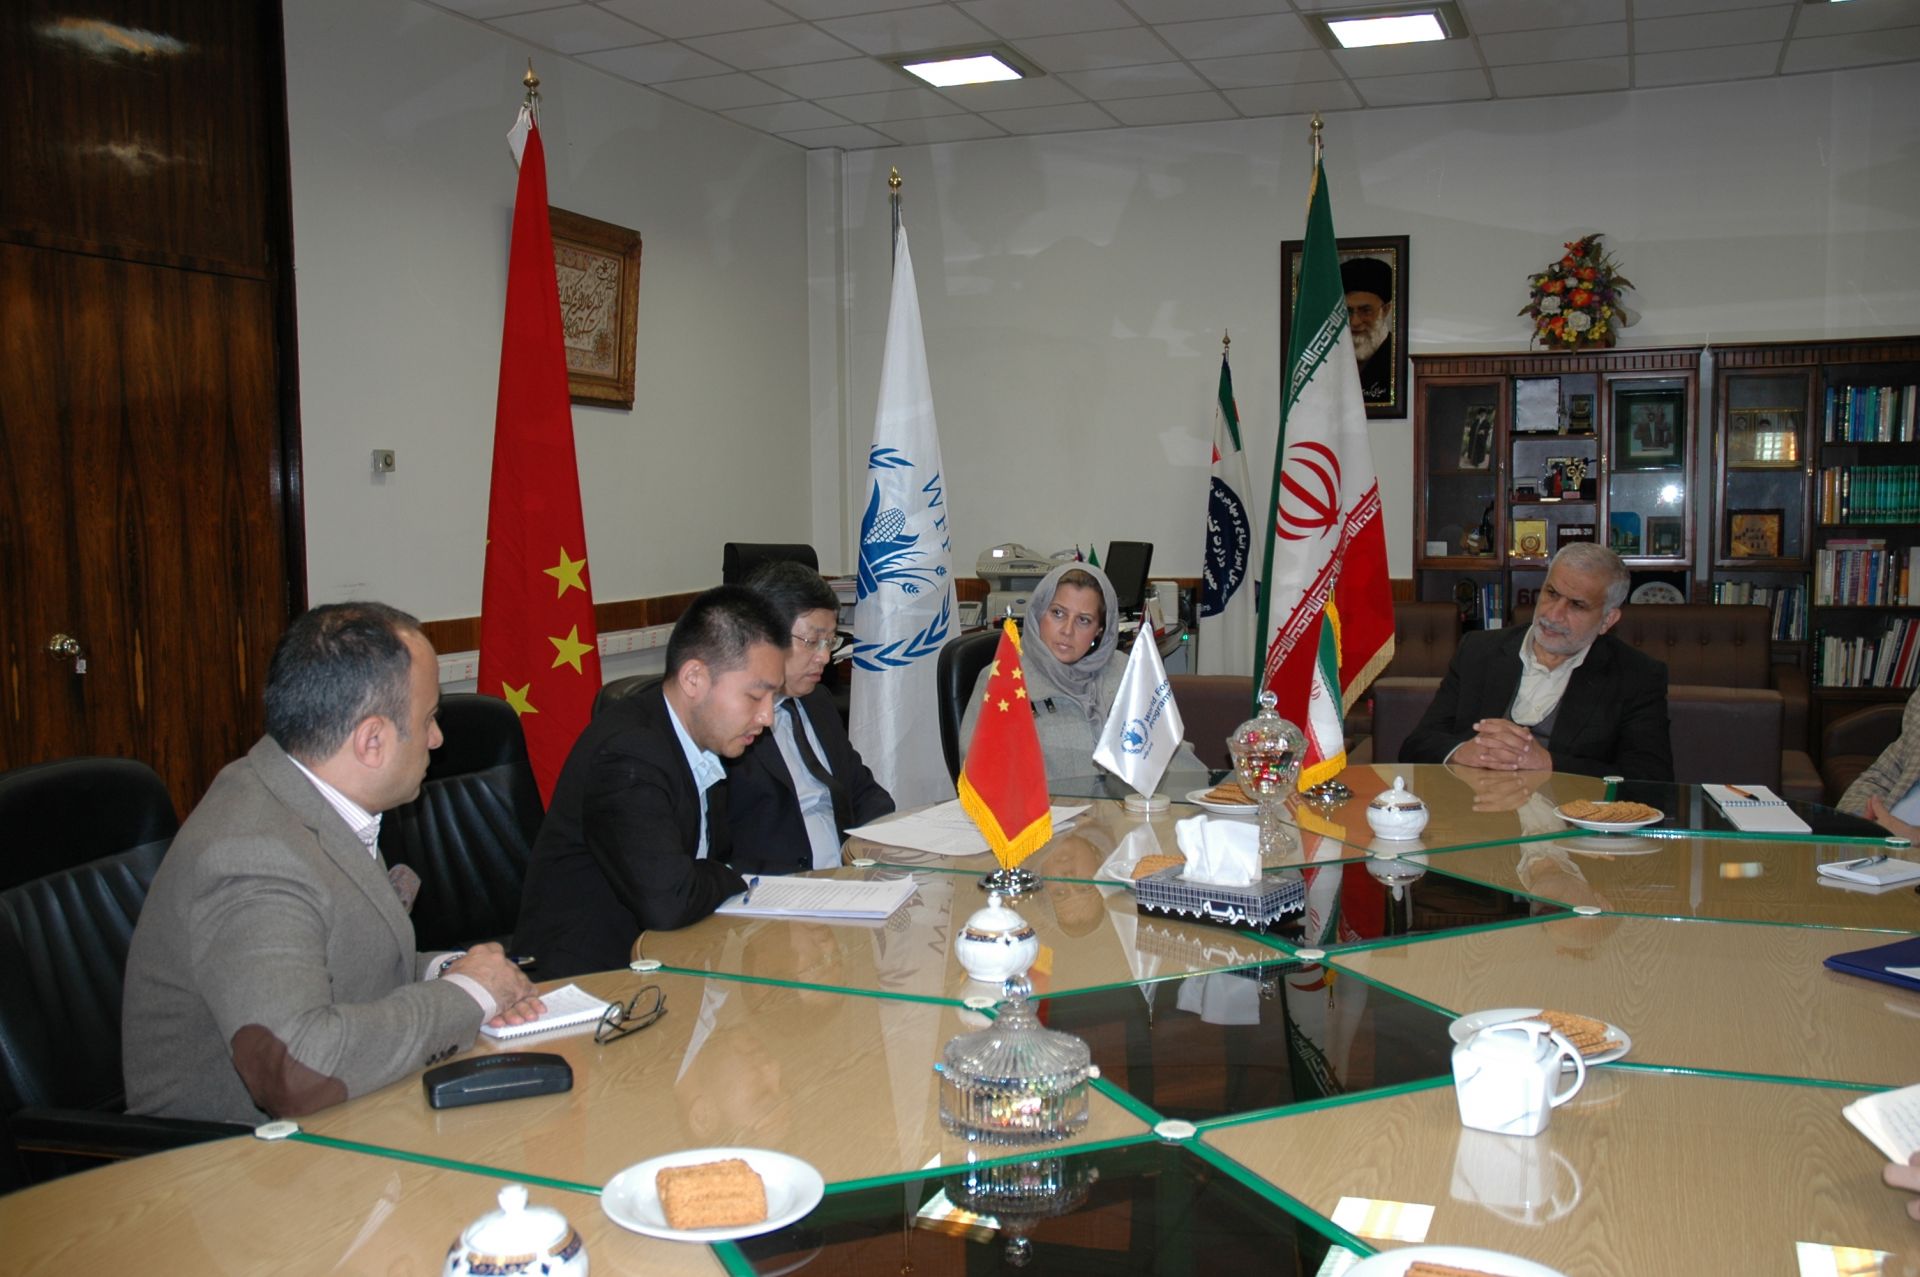 wfp-welcomes-contribution-from-china-to-support-afghan-and-iraqi-refugees-in-iran